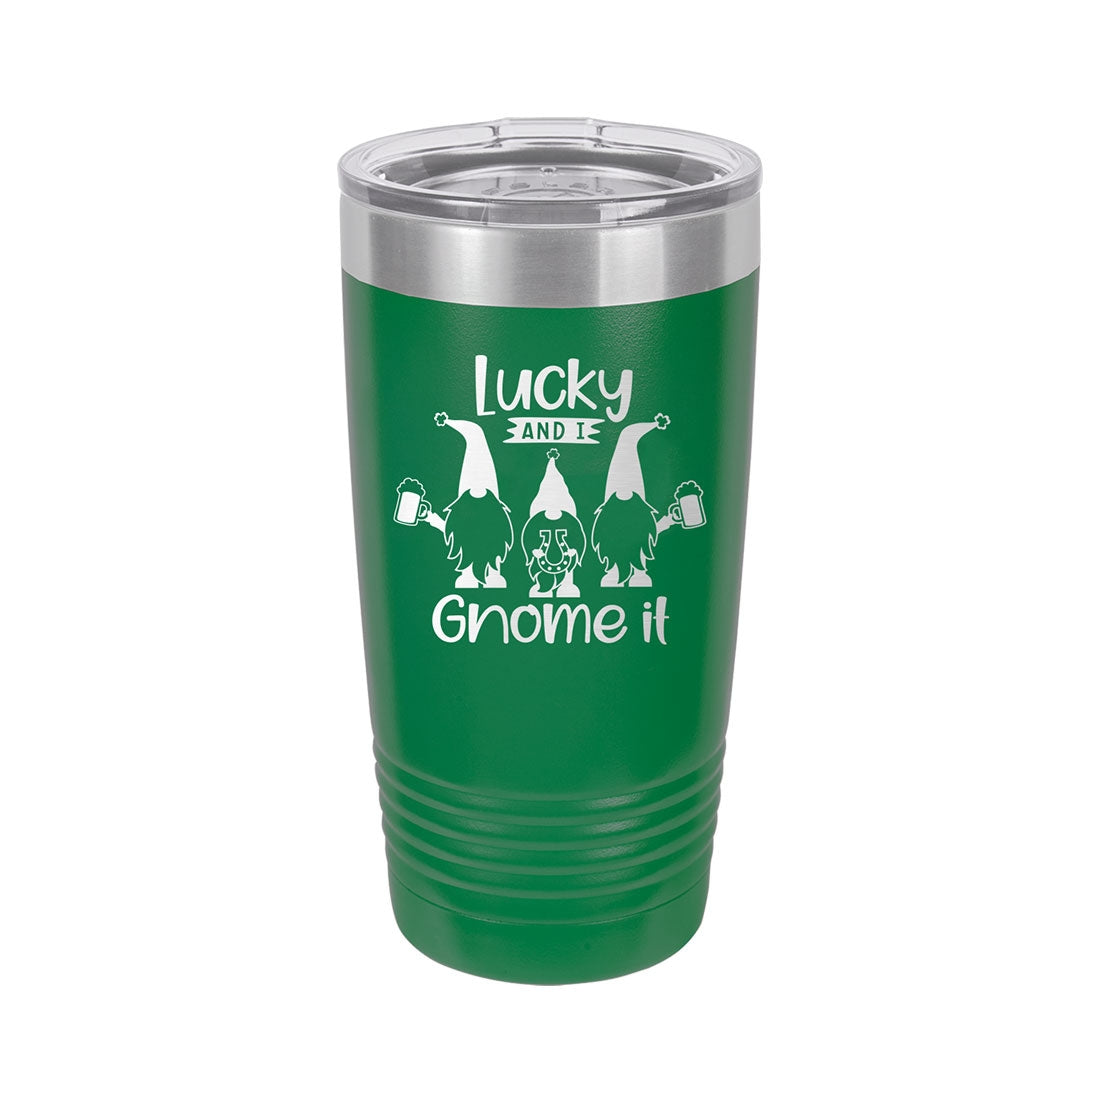 Gnome Hoppy Easter Teal 20oz Insulated Tumbler